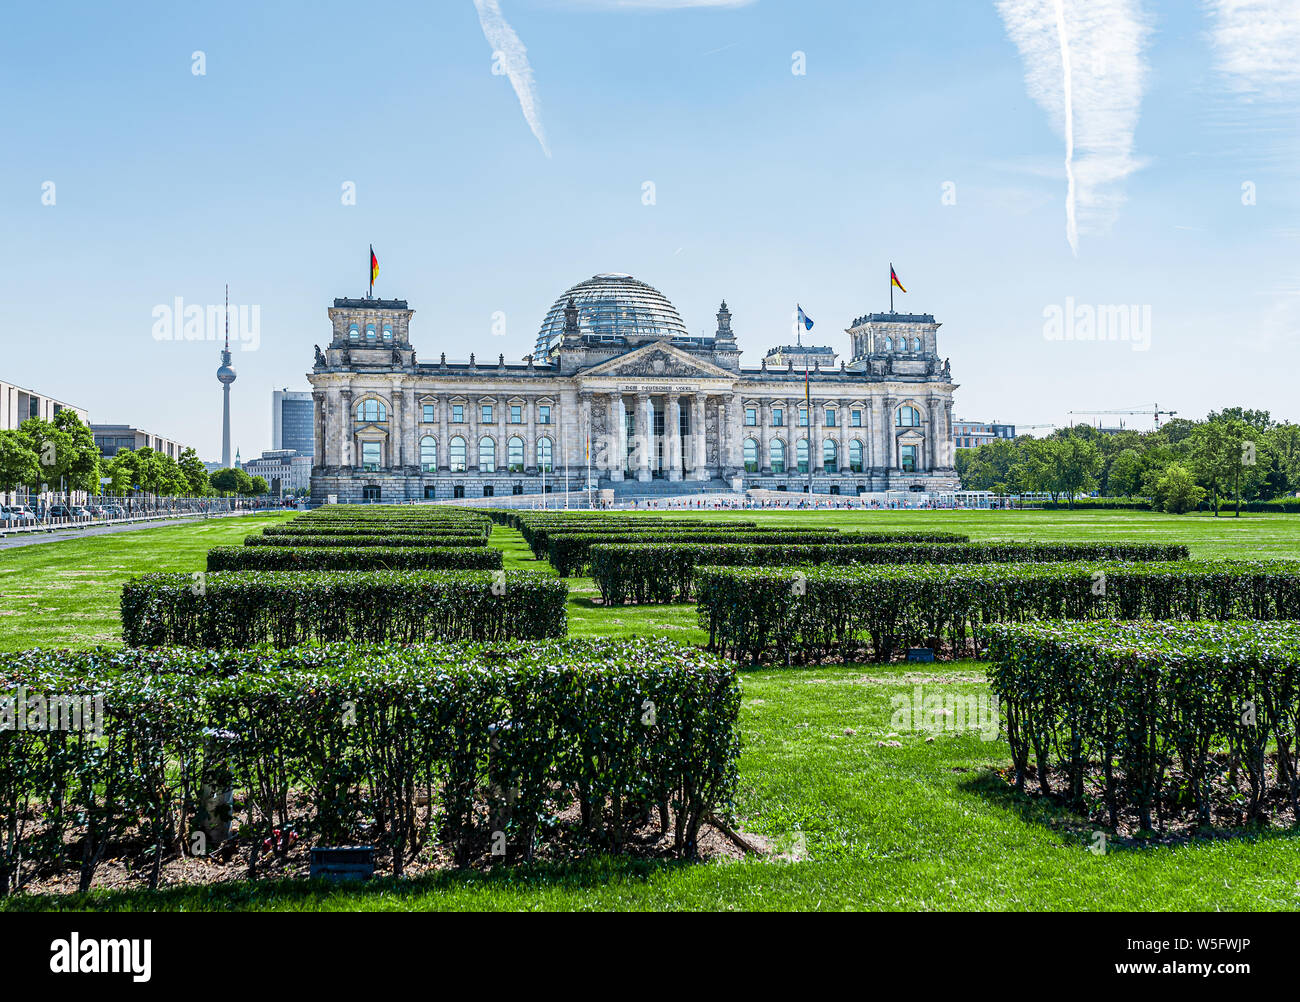 Reichstag building in Berlin, Germany, meeting place of the German parliament Bundestag on sunny summer day Stock Photo